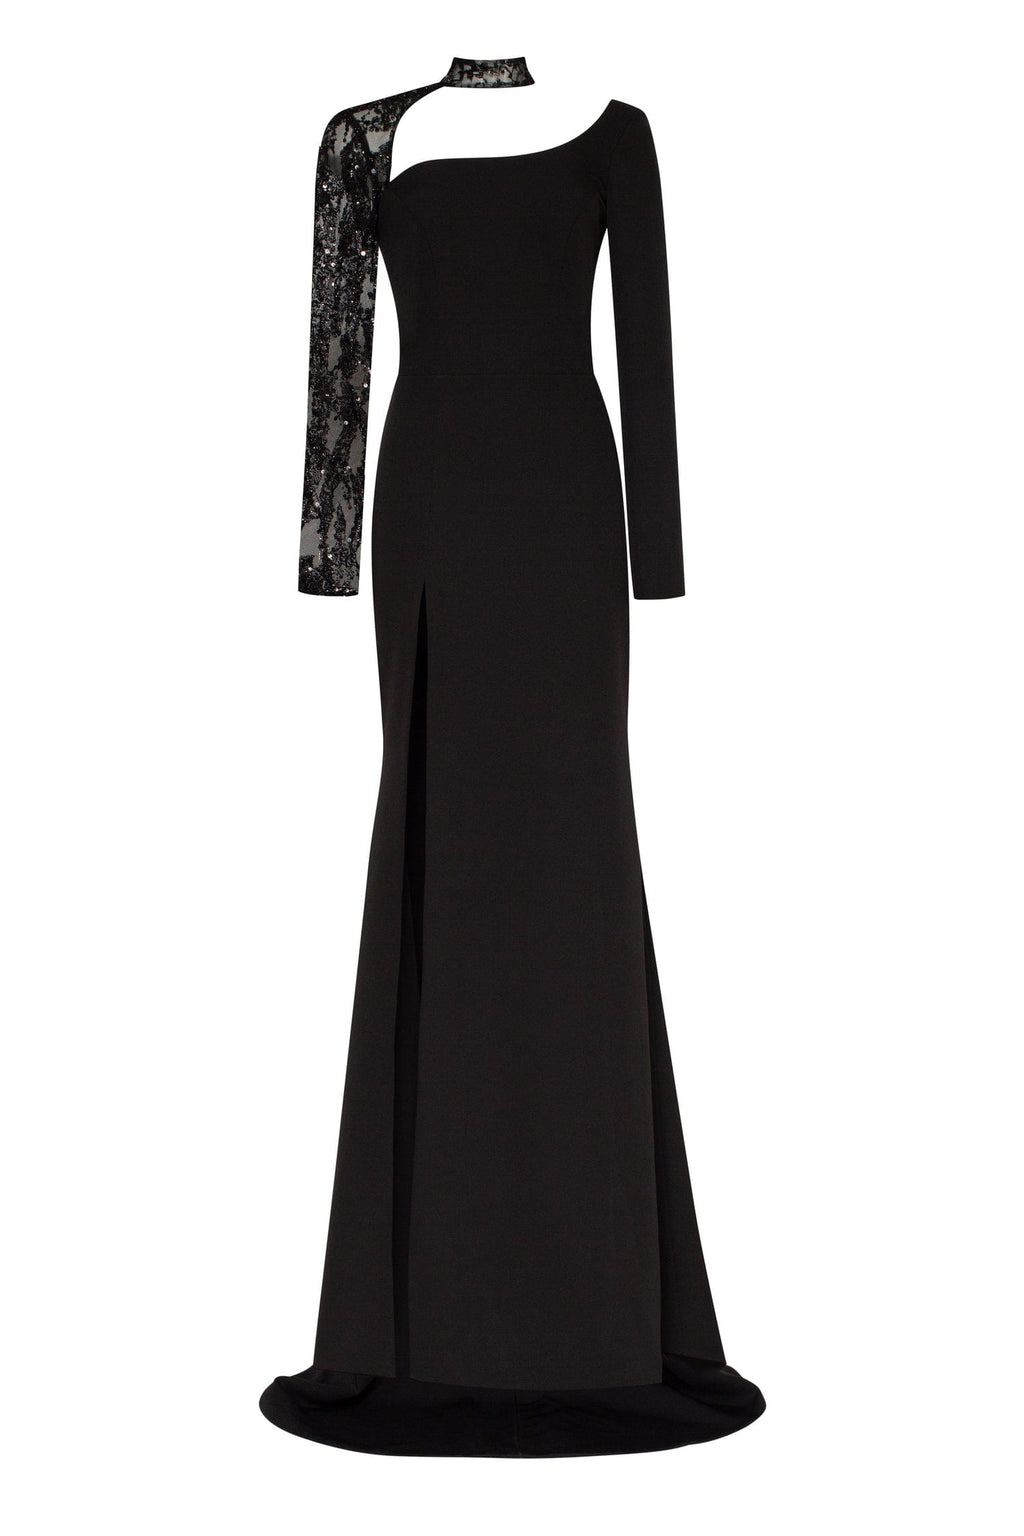 Buy Glamorous Black Long Sleeve Dresses here at – The Dress Outlet